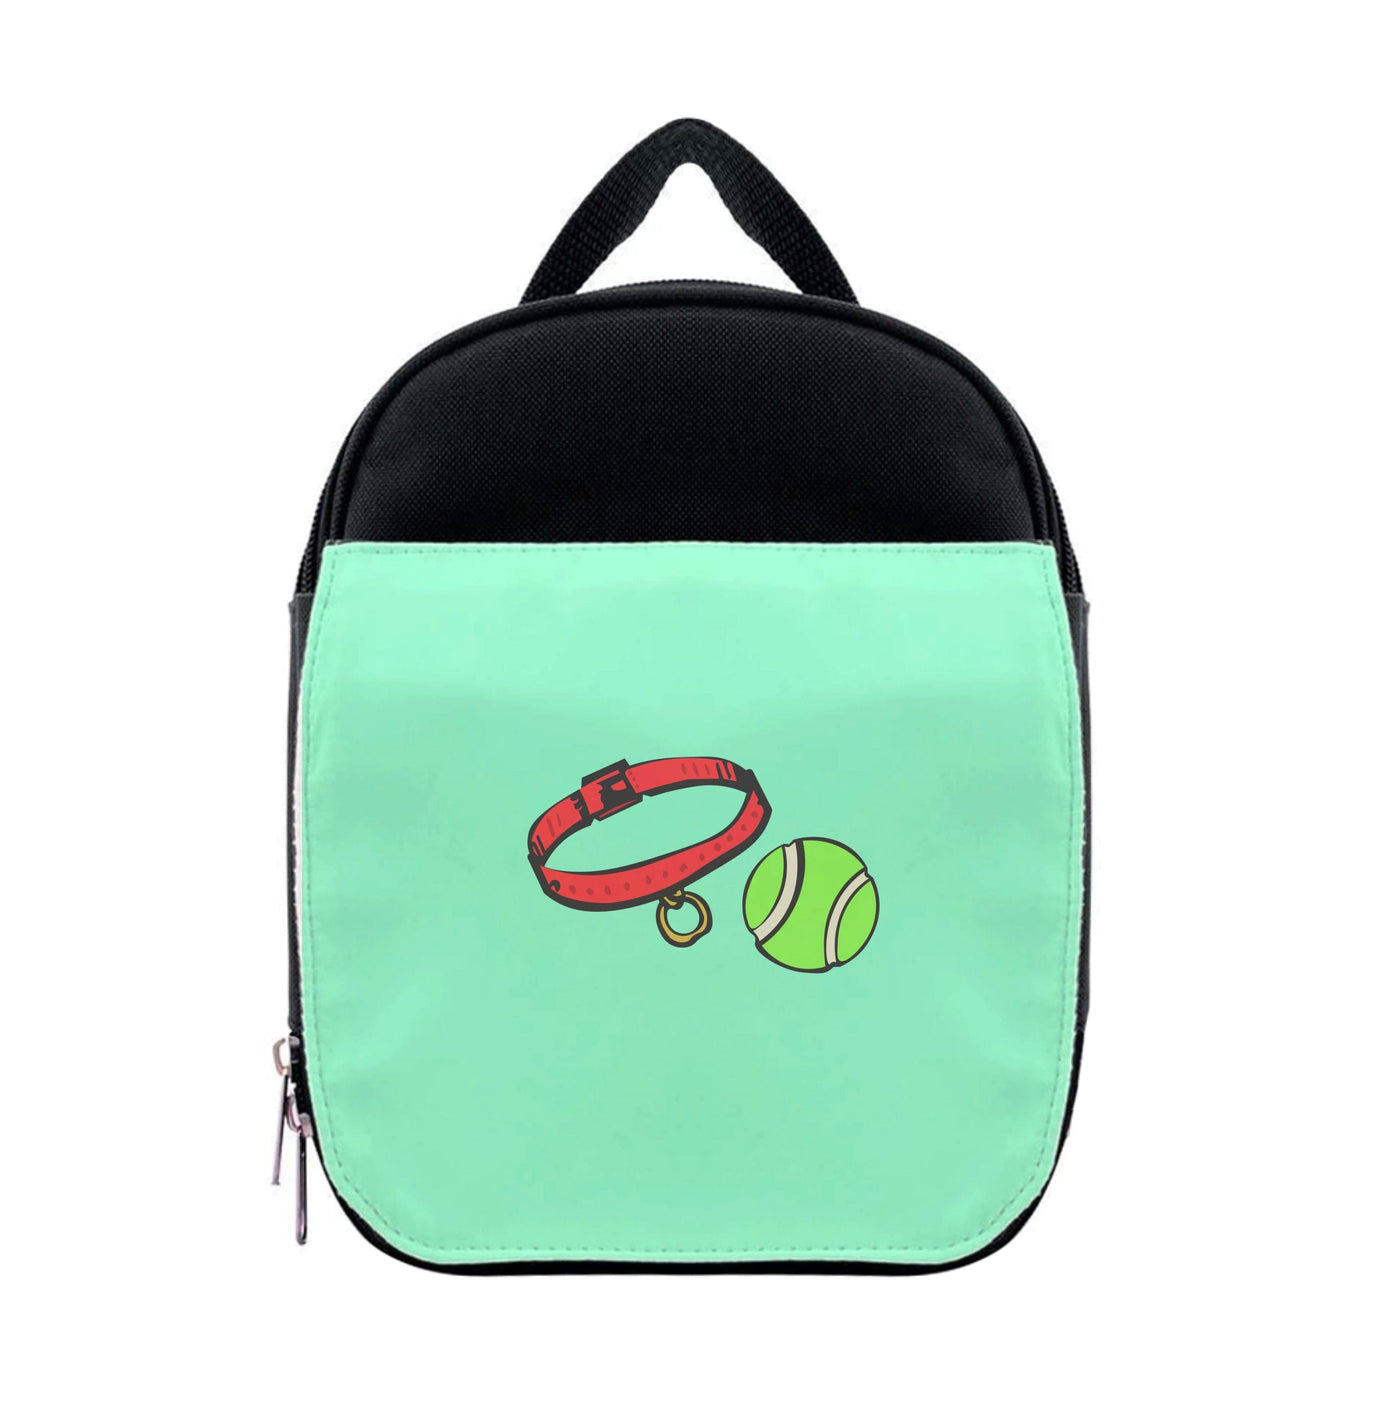 Collar and ball - Dog Patterns Lunchbox